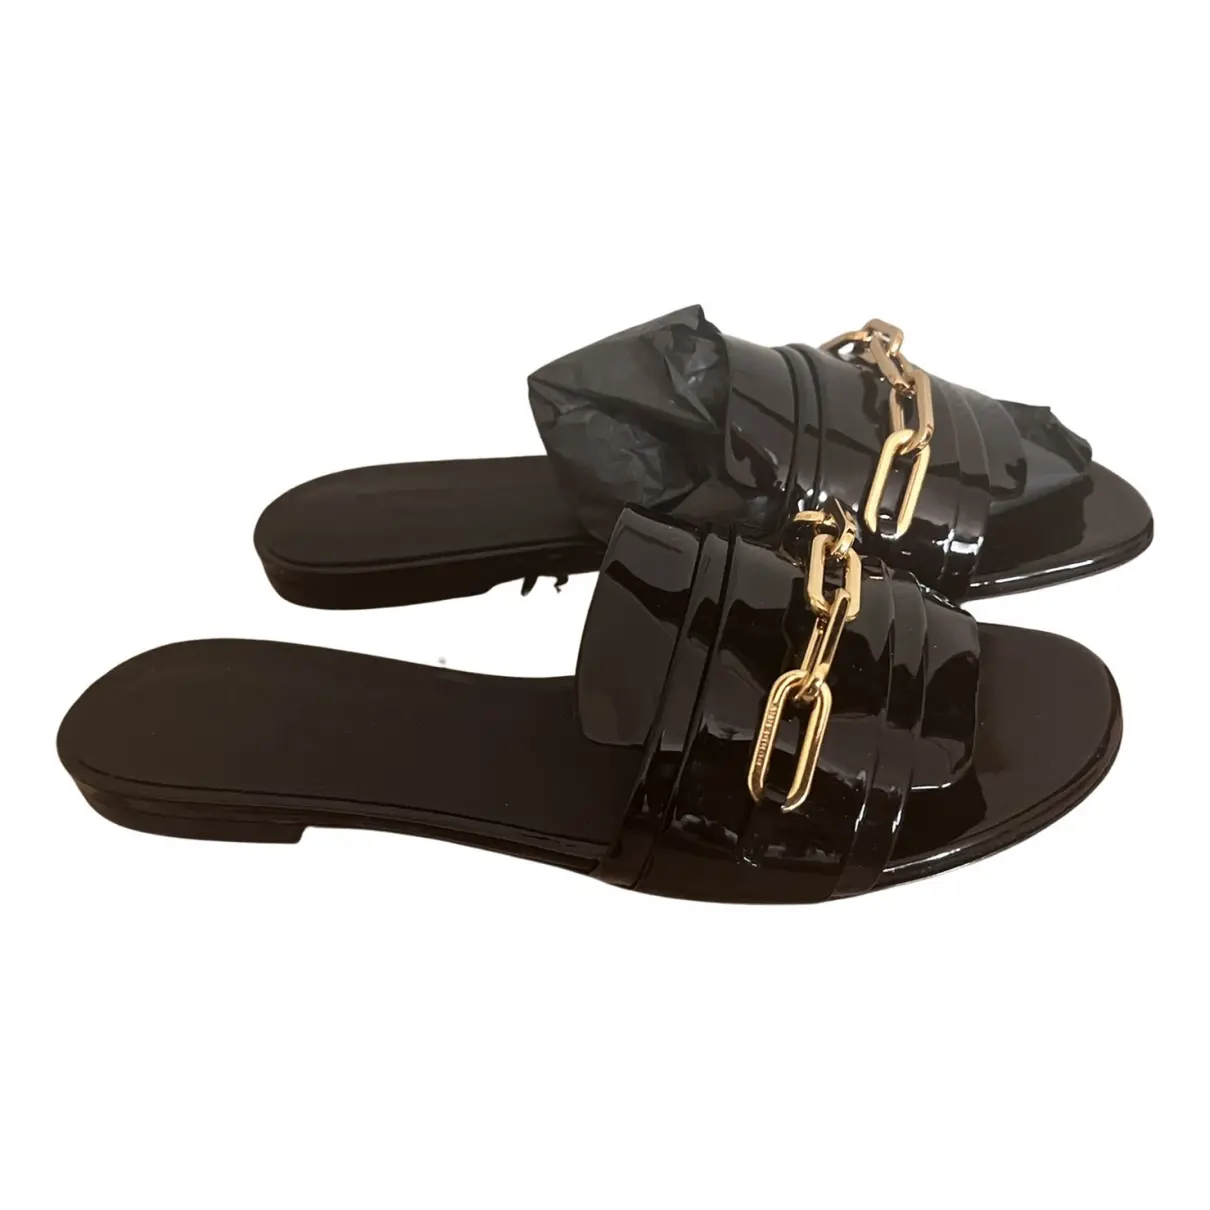 Patent leather sandals Burberry